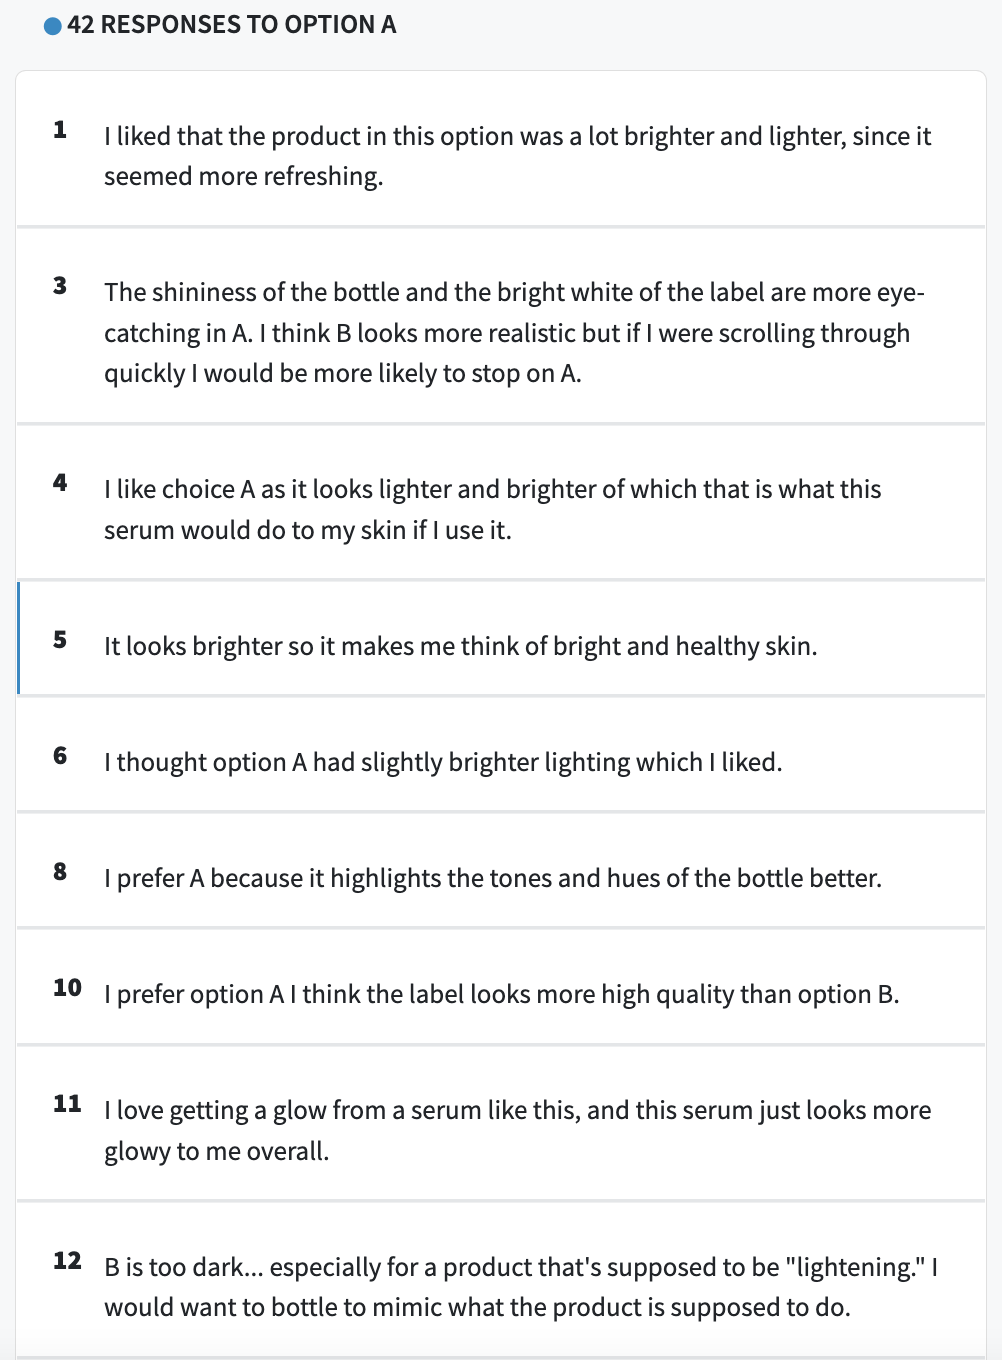 Screenshot of comments from PickFu poll for facial serum